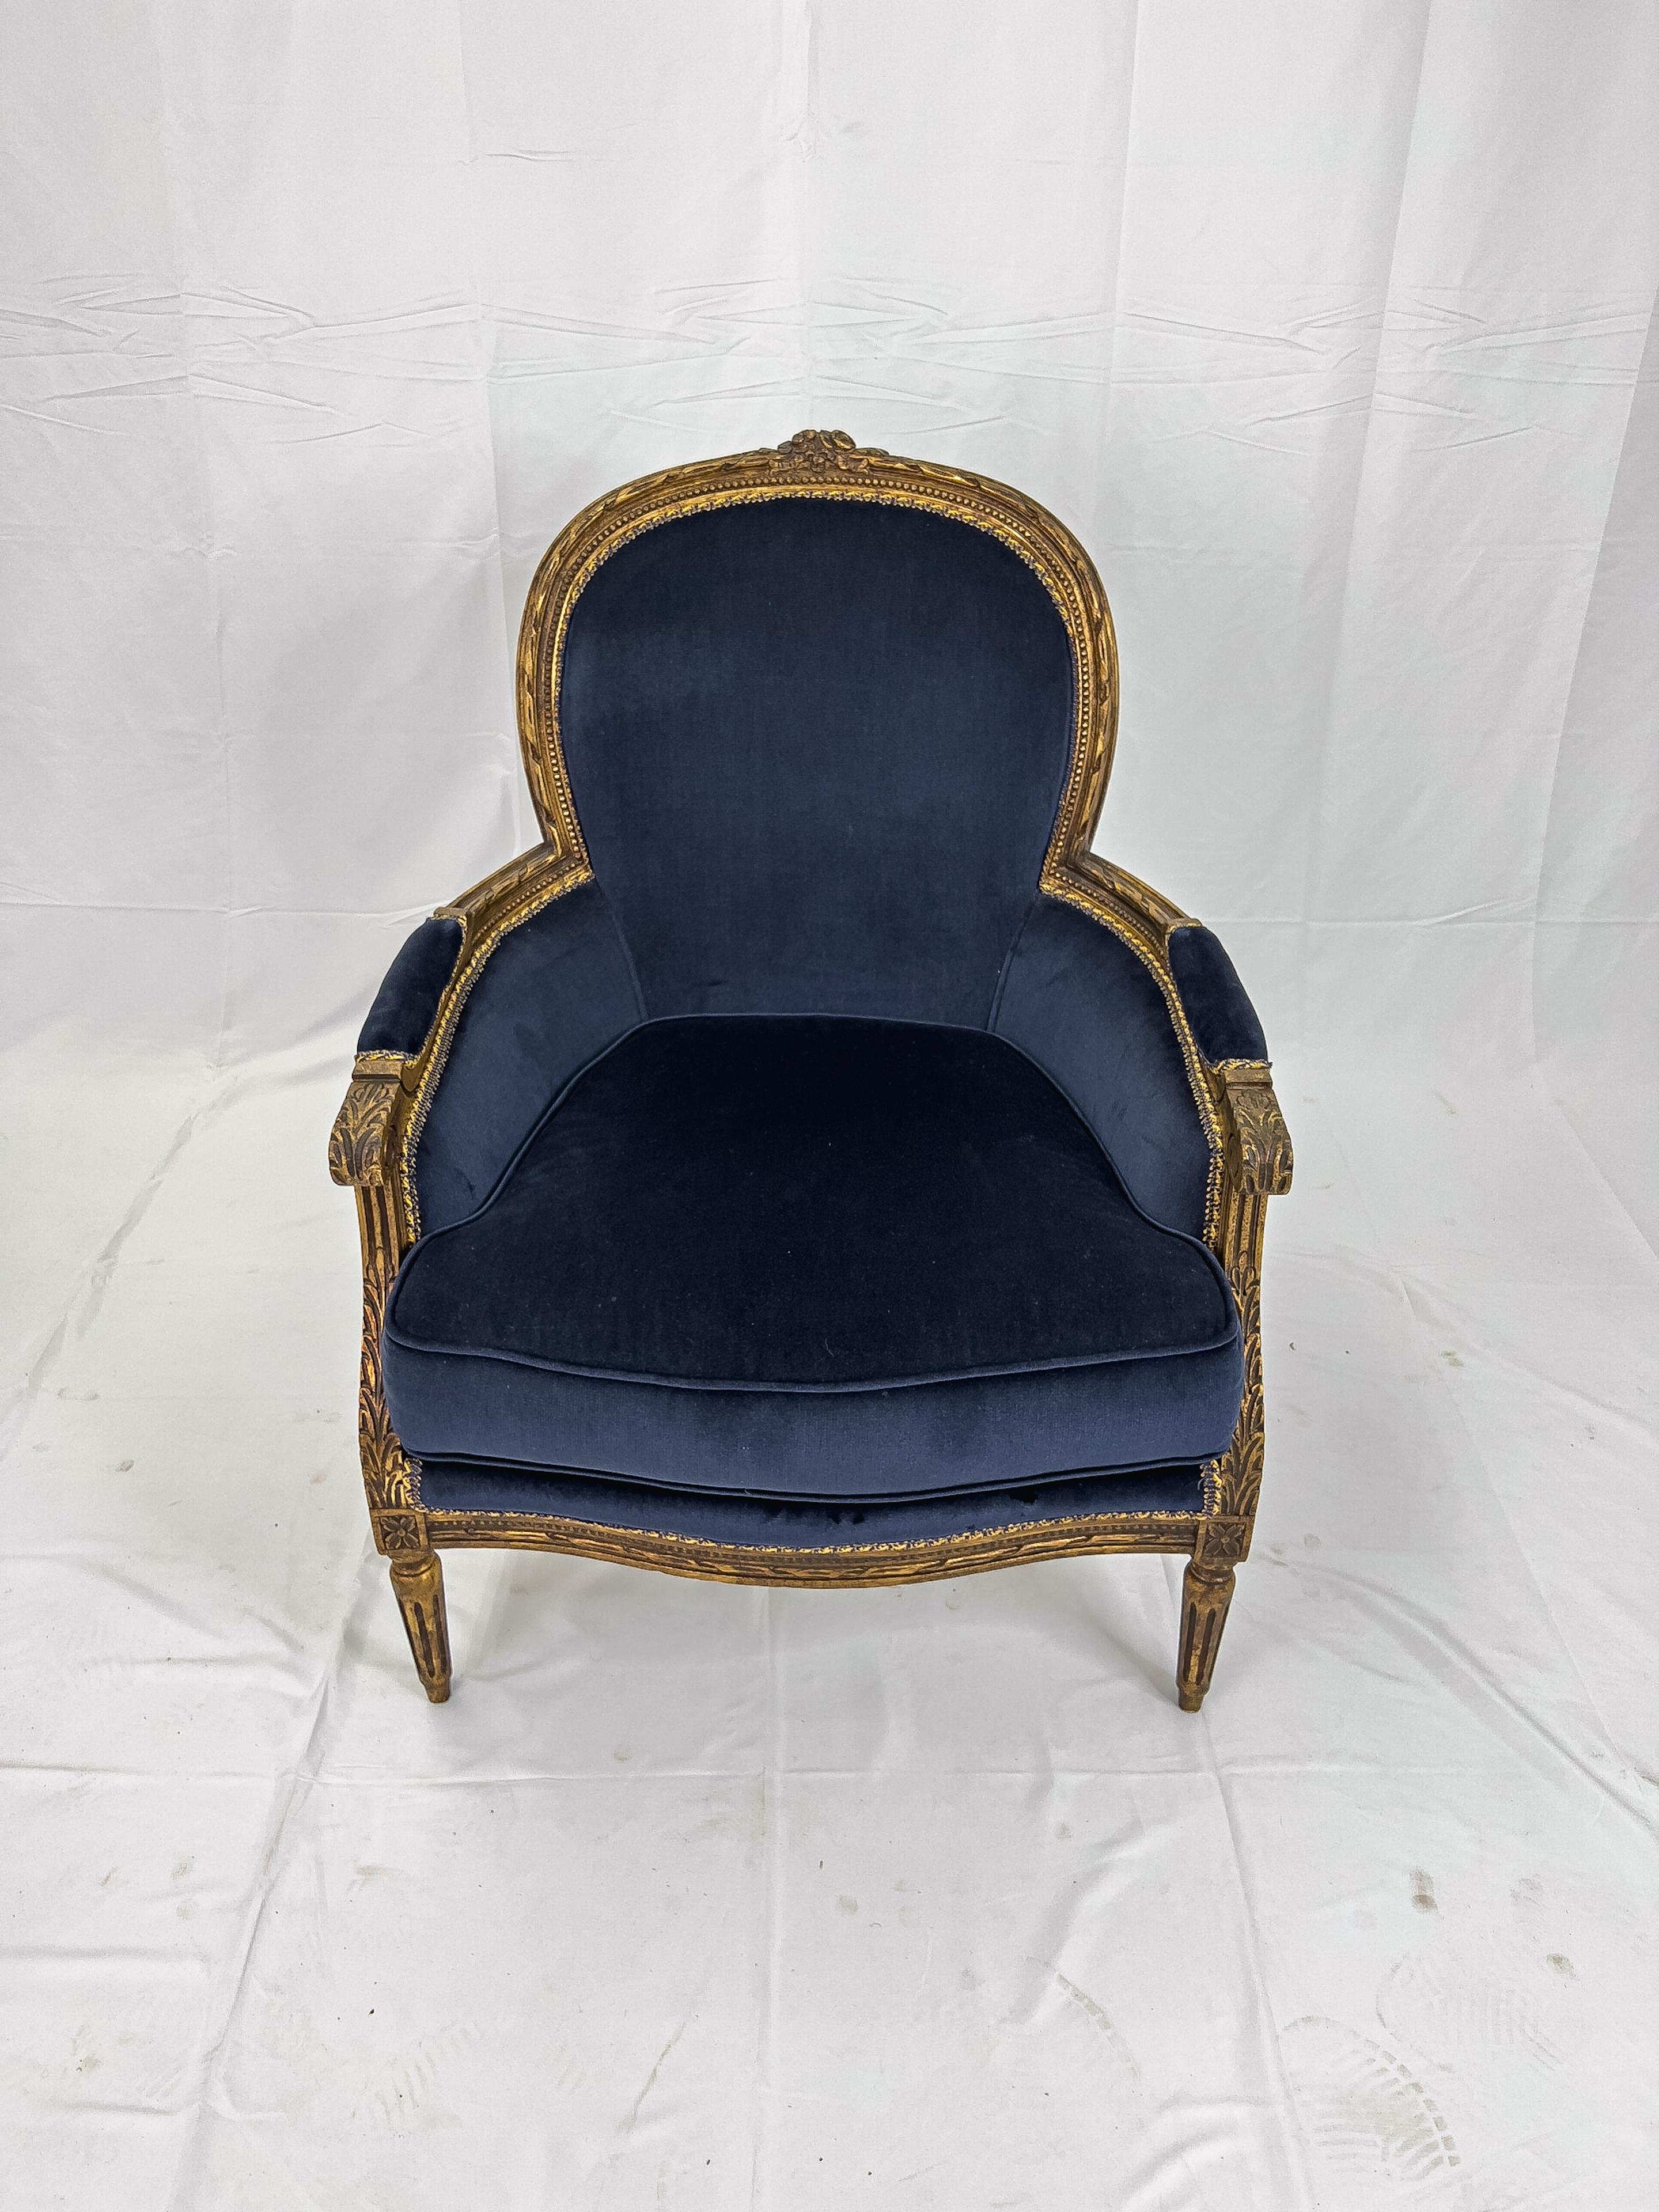 Pair of Louis XVI Style bergères having an oval back and an elaborate gilt wood frame with carved details. Upholstered in blue velvet.
The chairs have a frame made entirely of curved gilt wood, very elegant and very pompous.
The shapes are very